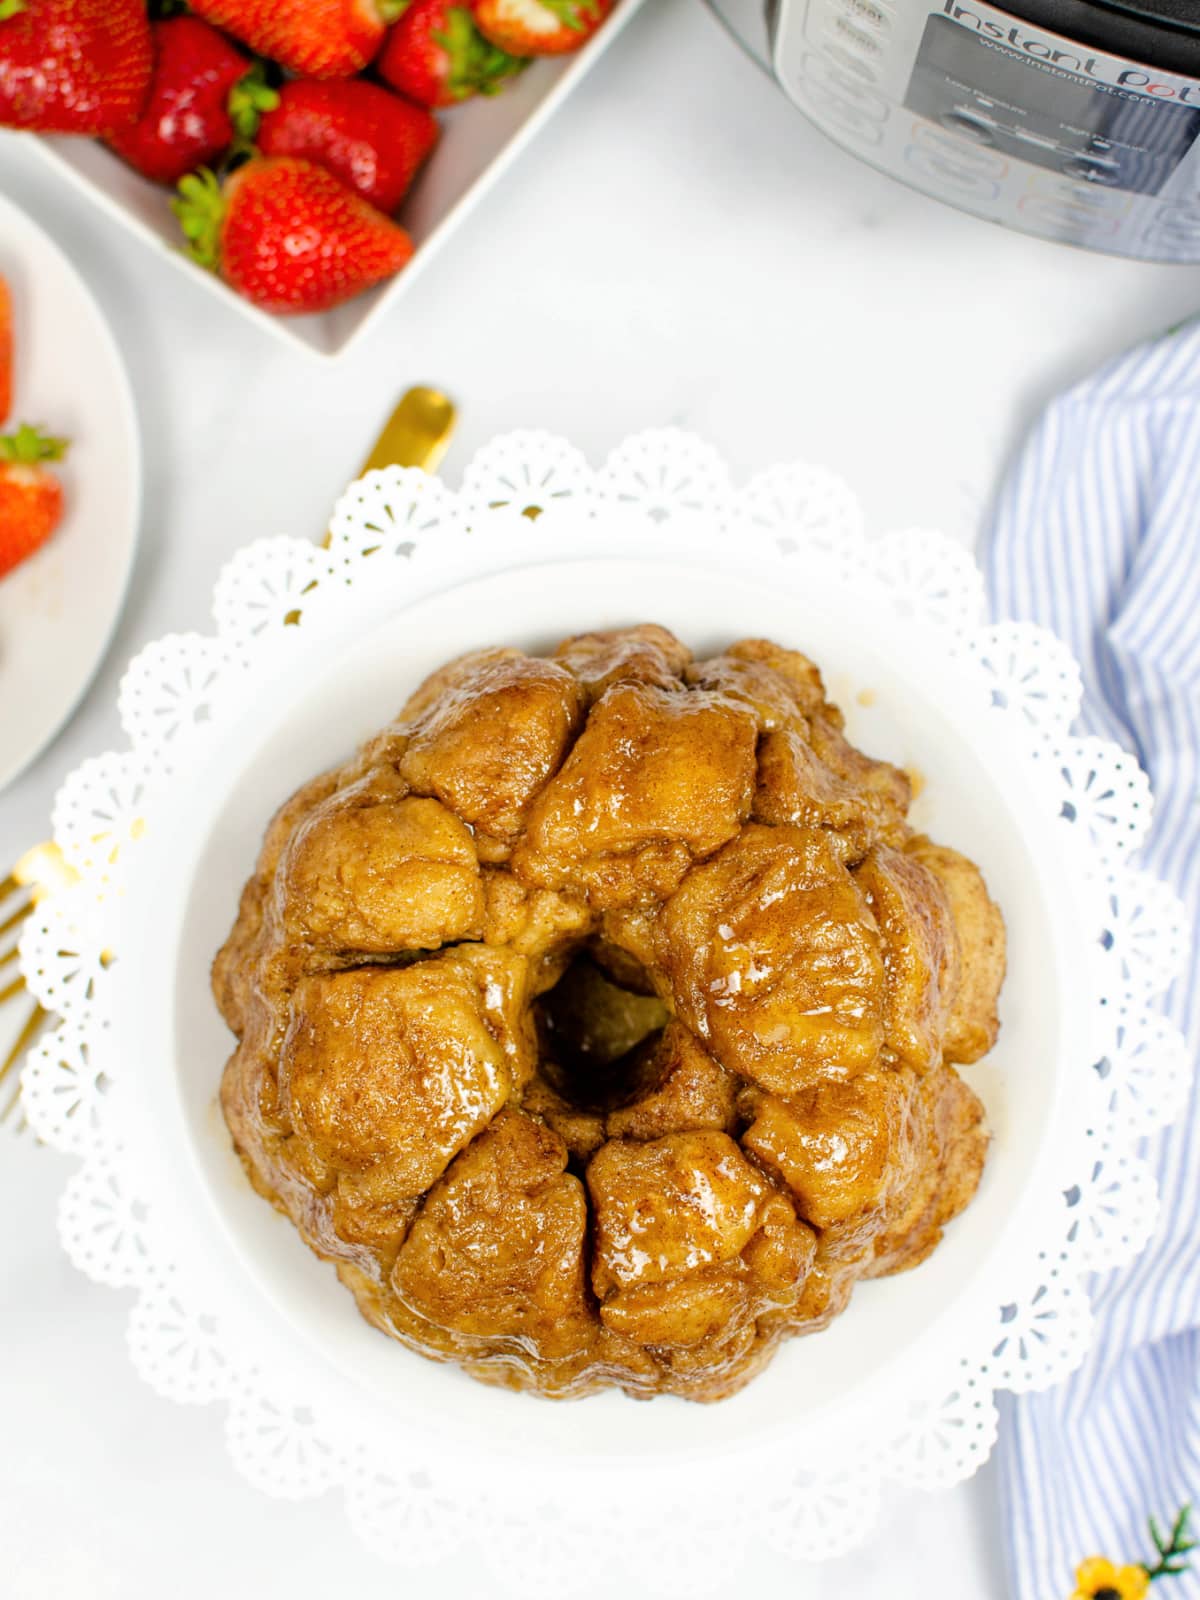 This all-natural cleaner will deodorize and sanitize your pressure cooker  so your monkey bread doesn't take like chili. Learn how to…